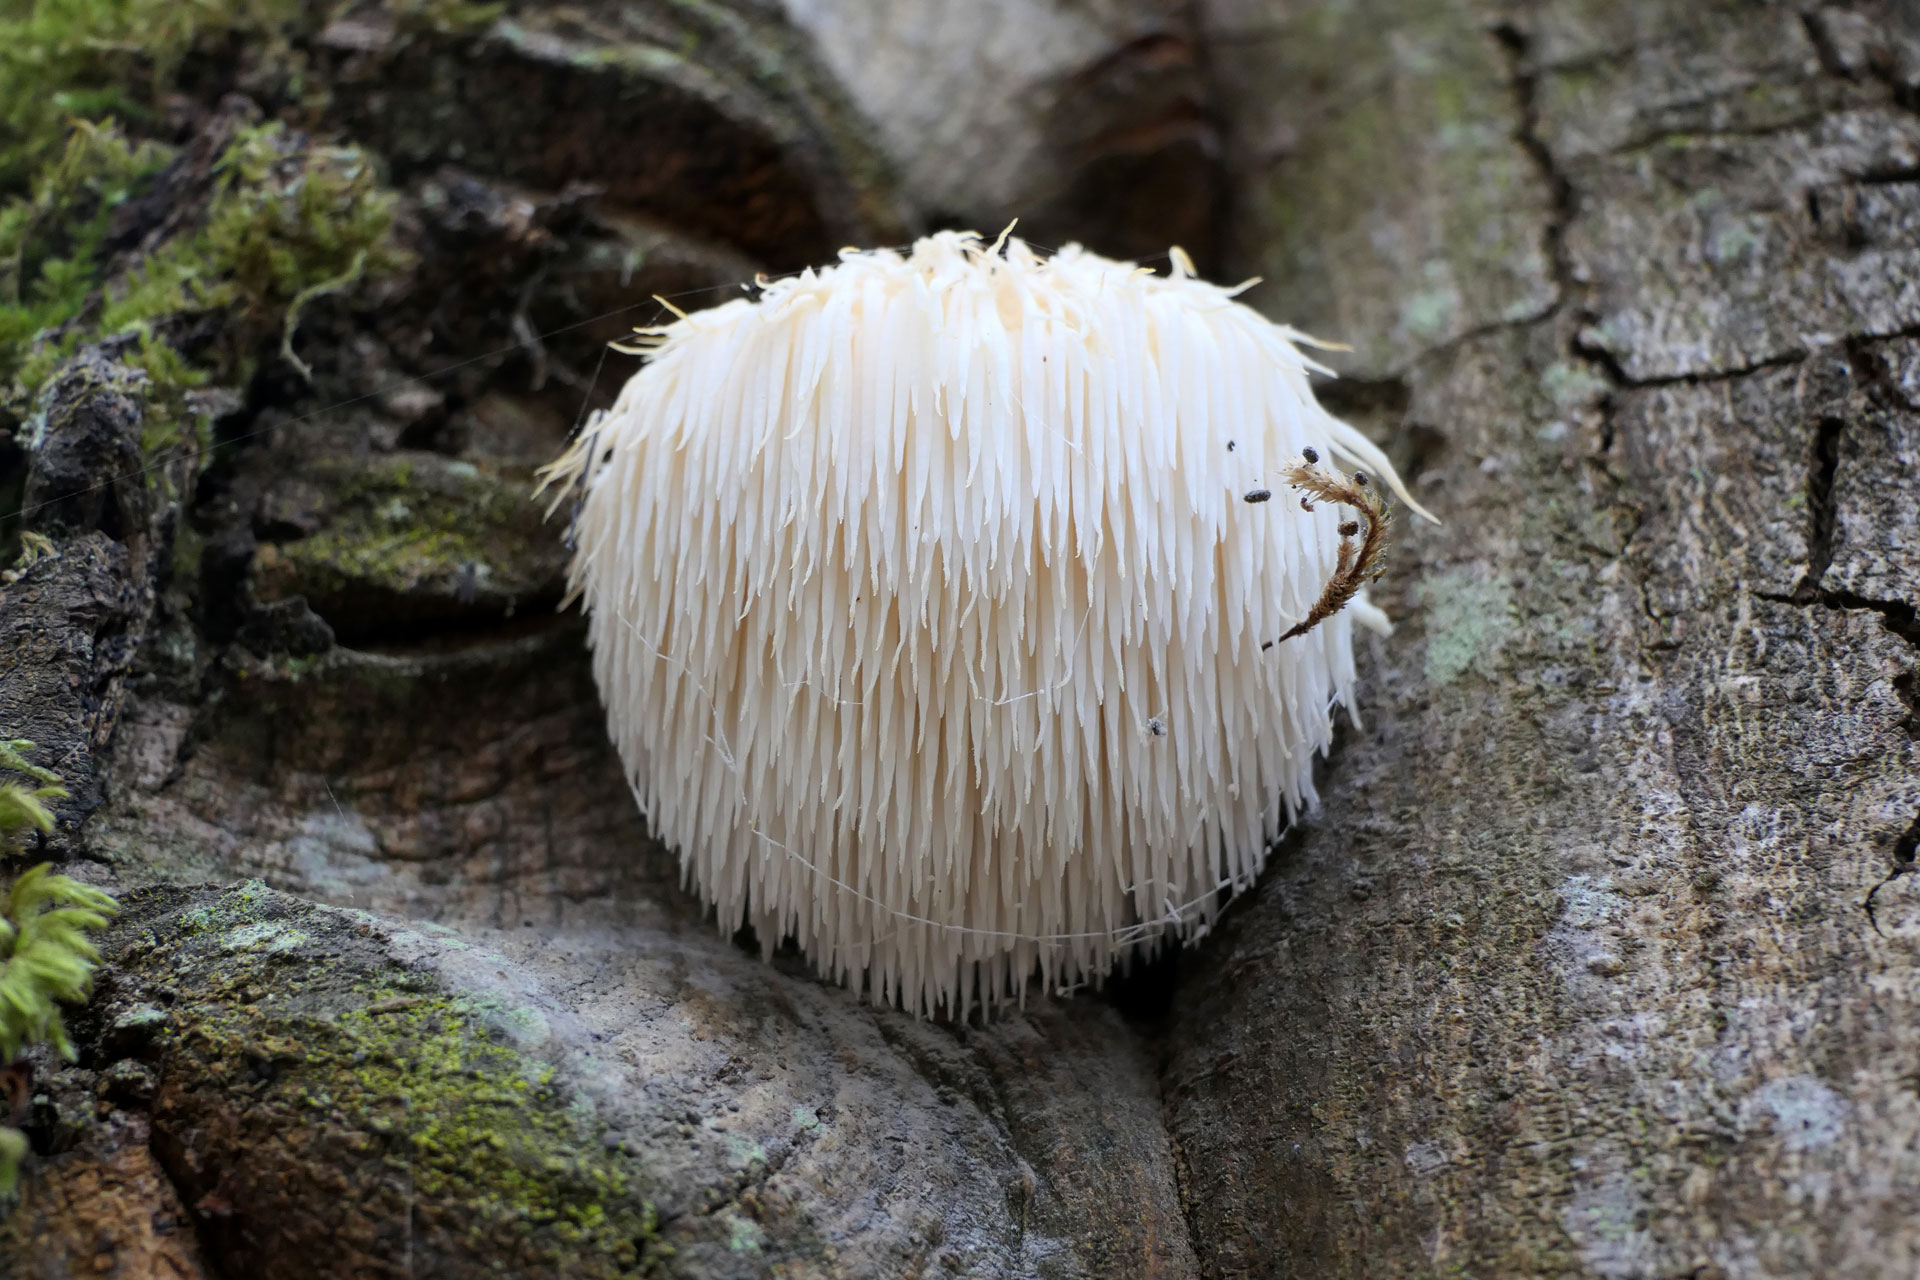 Lion’s Mane Mushrooms: What Are The Health Benefits?